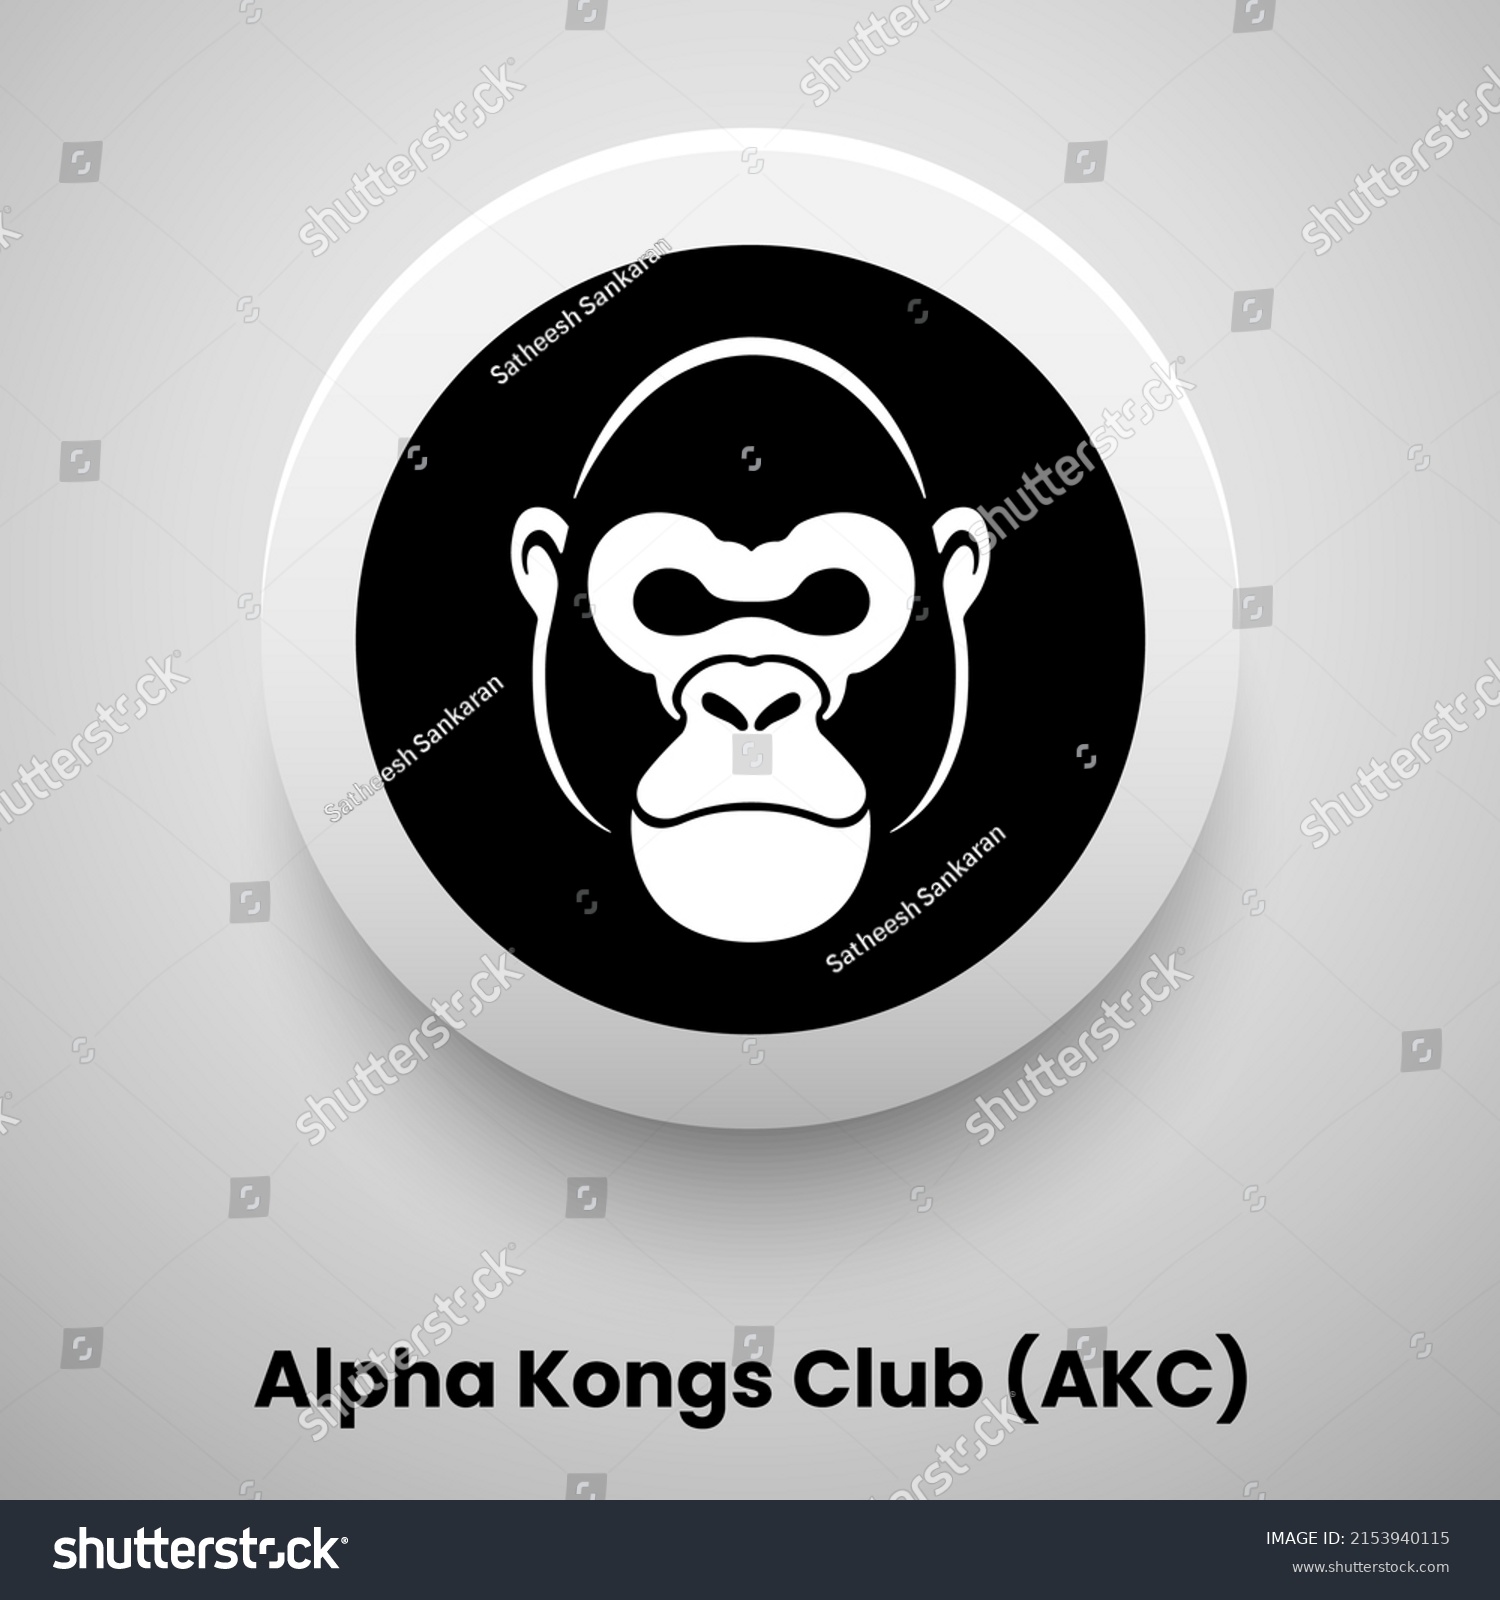 SVG of Creative block chain based crypto currency Alpha Kongs Club (AKC) logo vector illustration design. Can be used as currency icon, badge, label, symbol, sticker and print background template svg